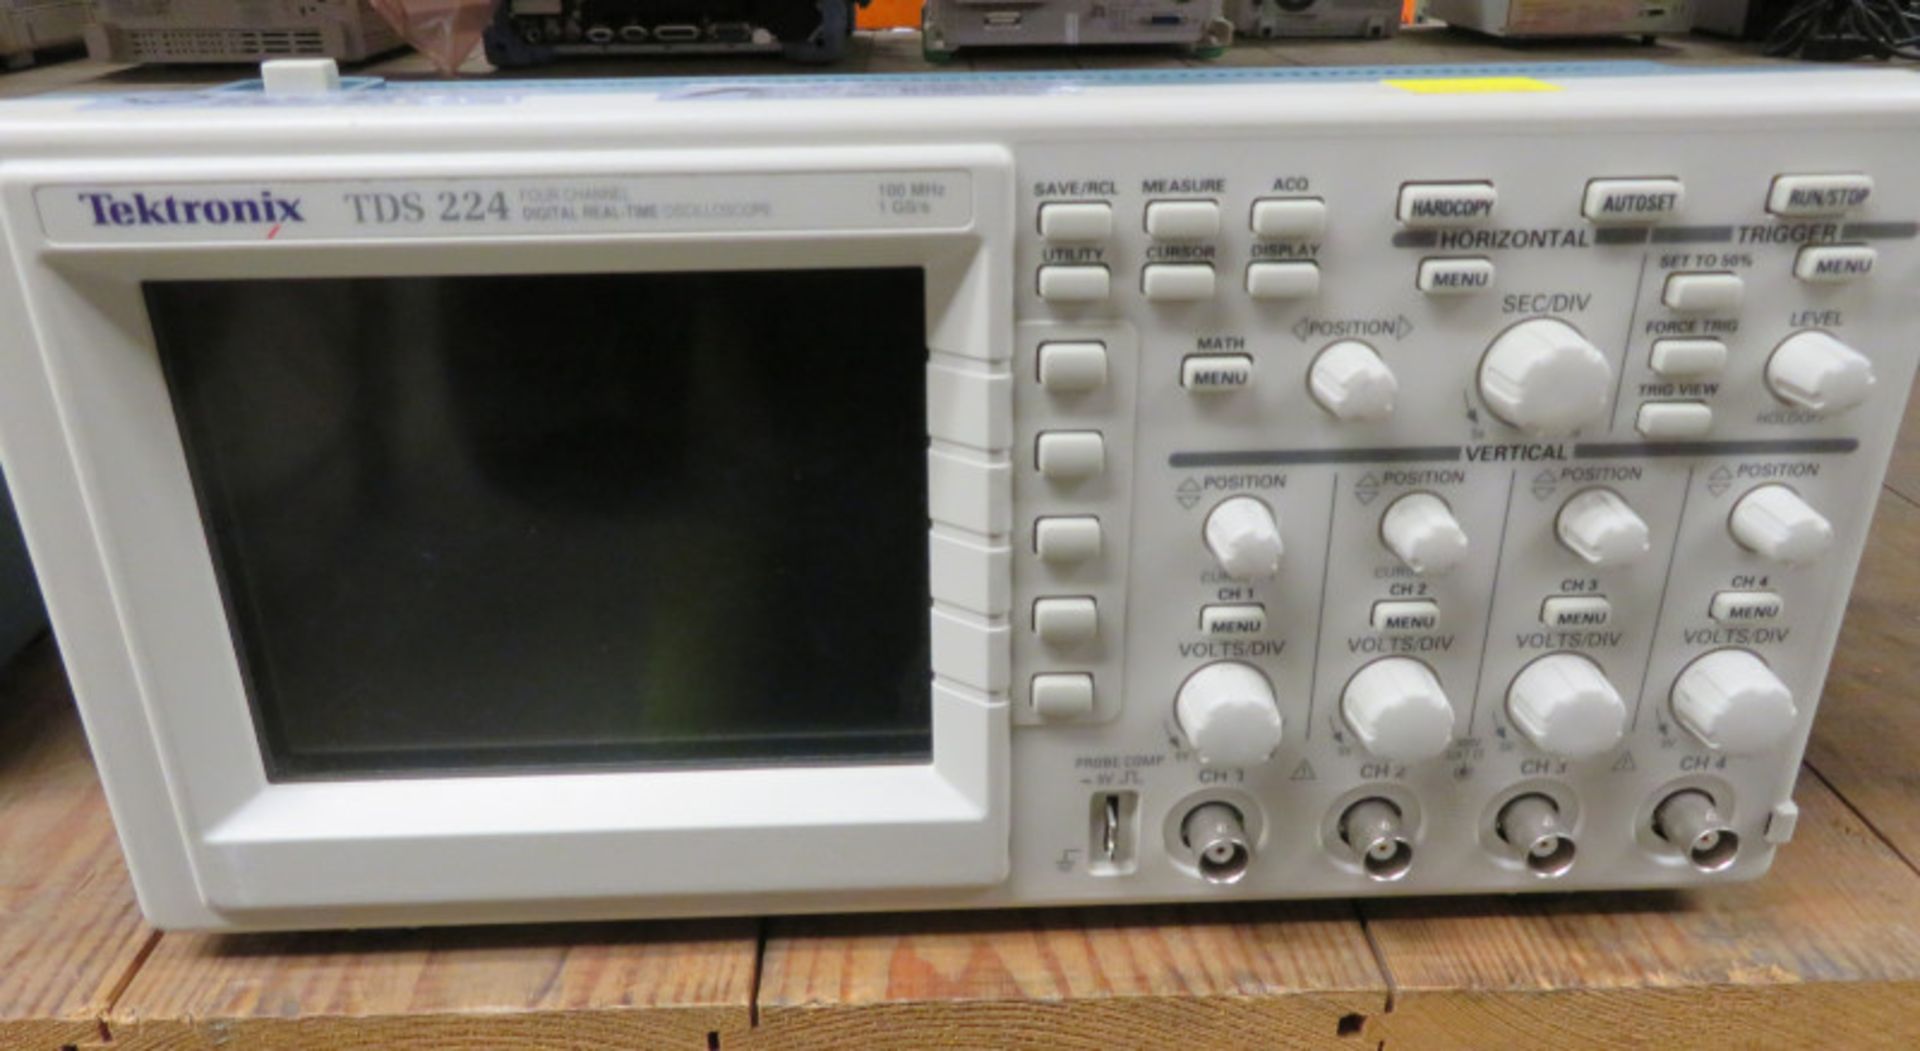 Tektronix TDS 224 Four Channel Digital Real Time Oscilloscope - 100MHz 1GS/s (No Power Cab